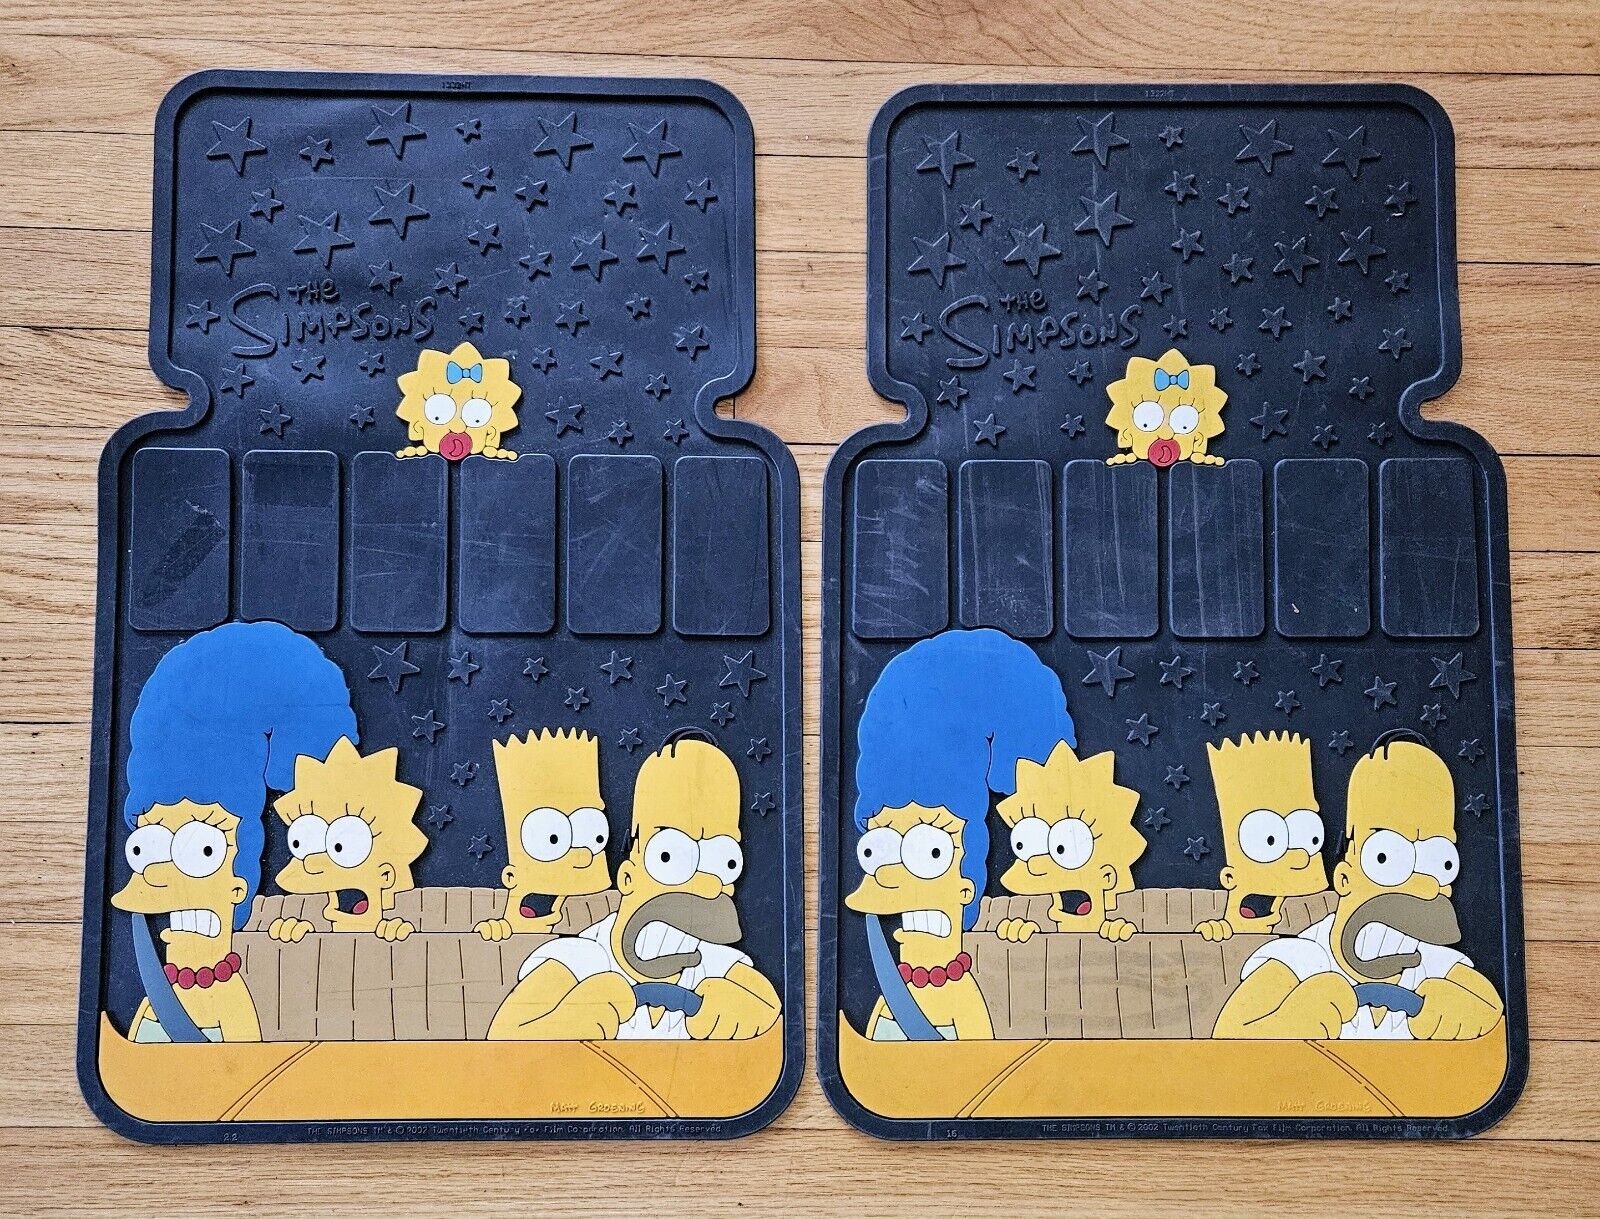 The Simpsons - Rare Set of 2 Rubber Floor Mats for Car – 2002 Brand New  No Tags